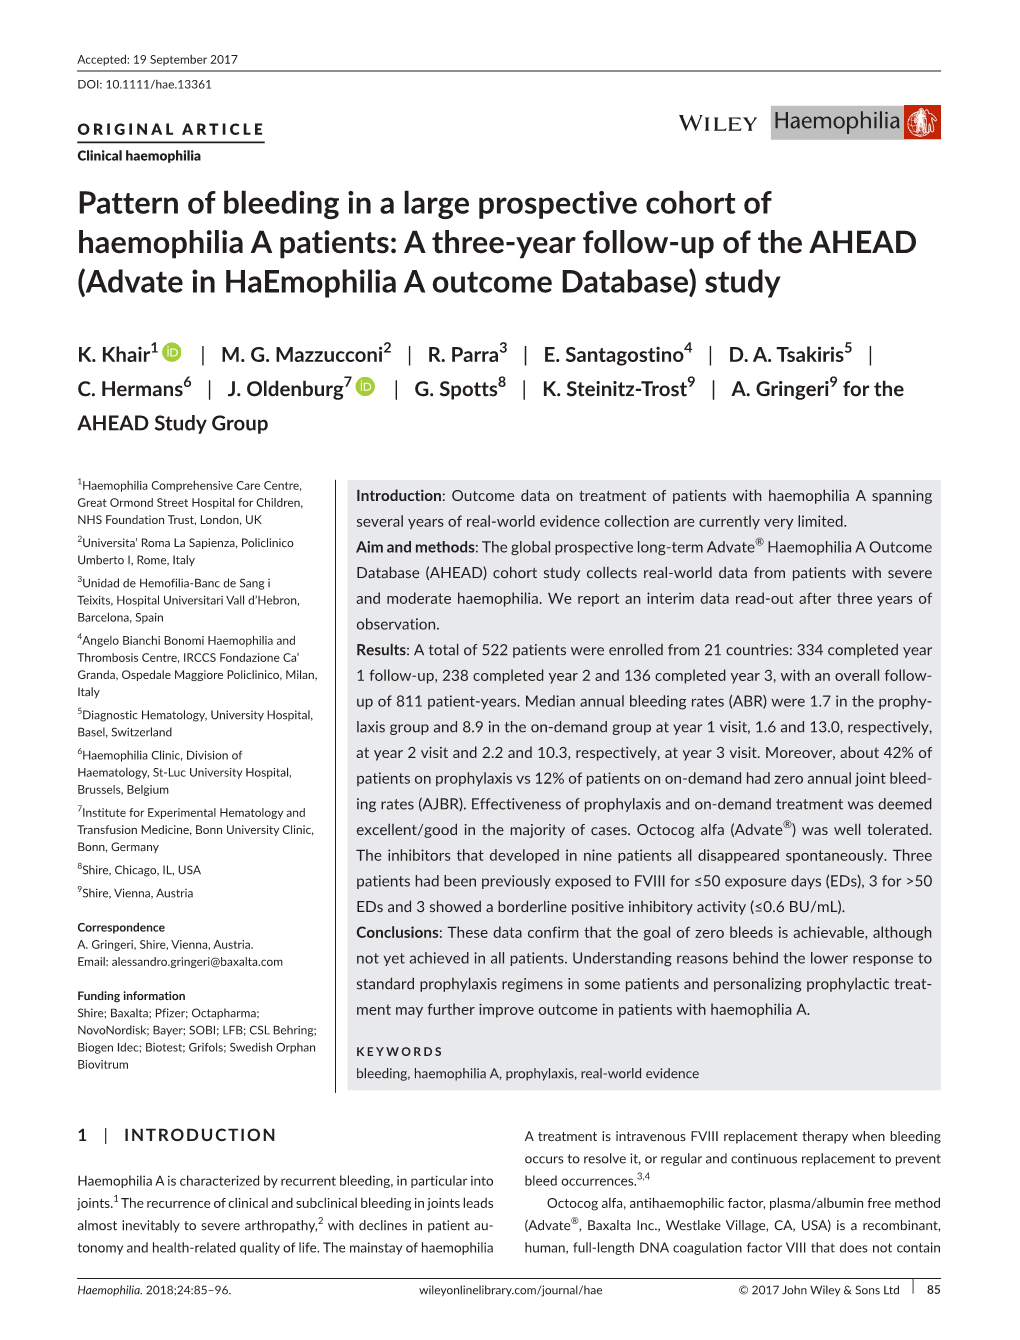 Year Follow- up of the AHEAD (Advate in Haemophilia a Outcome Database)